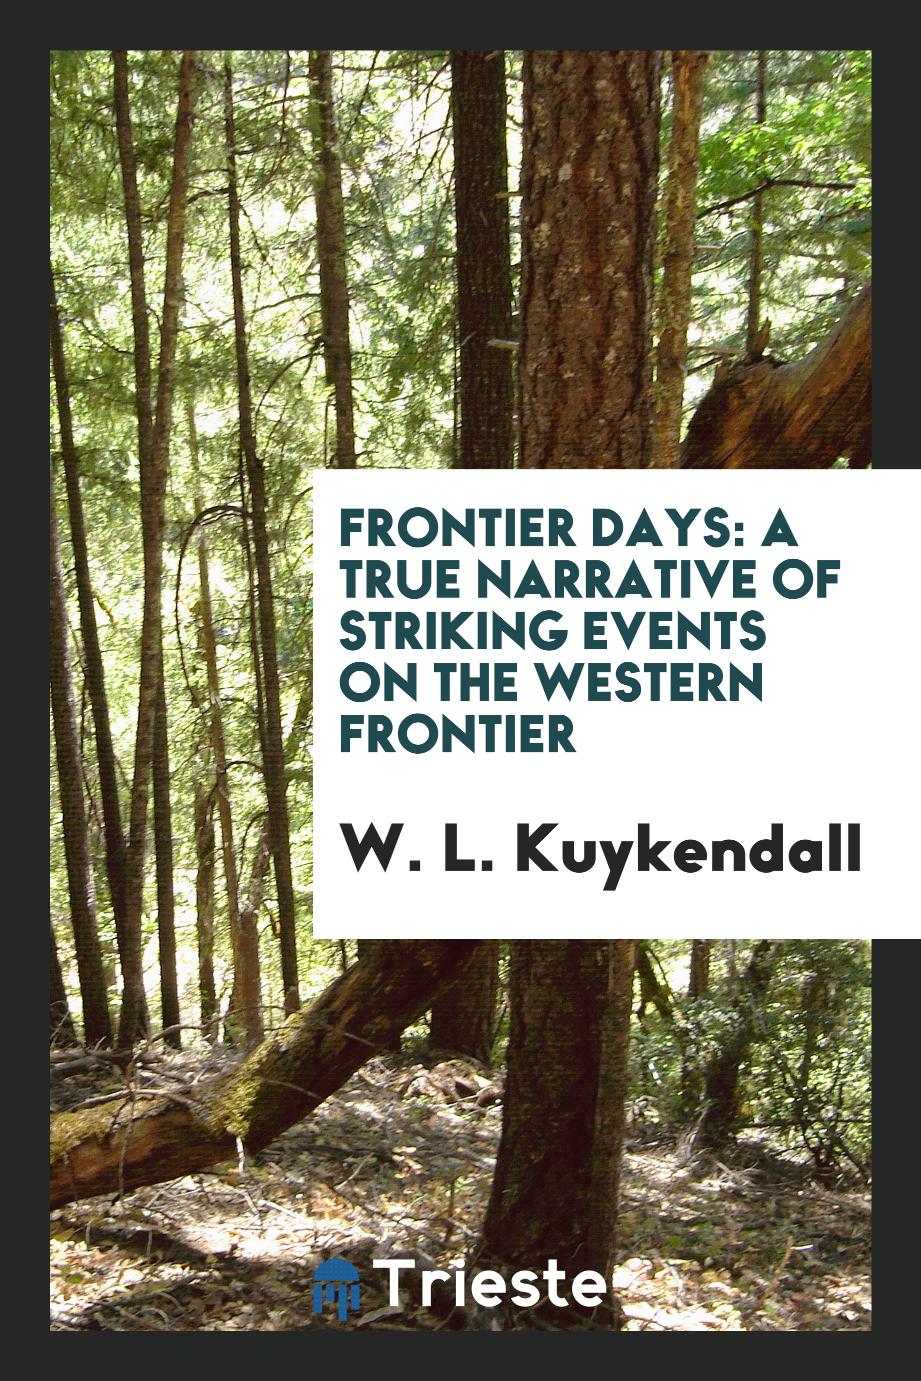 Frontier days: a true narrative of striking events on the Western frontier